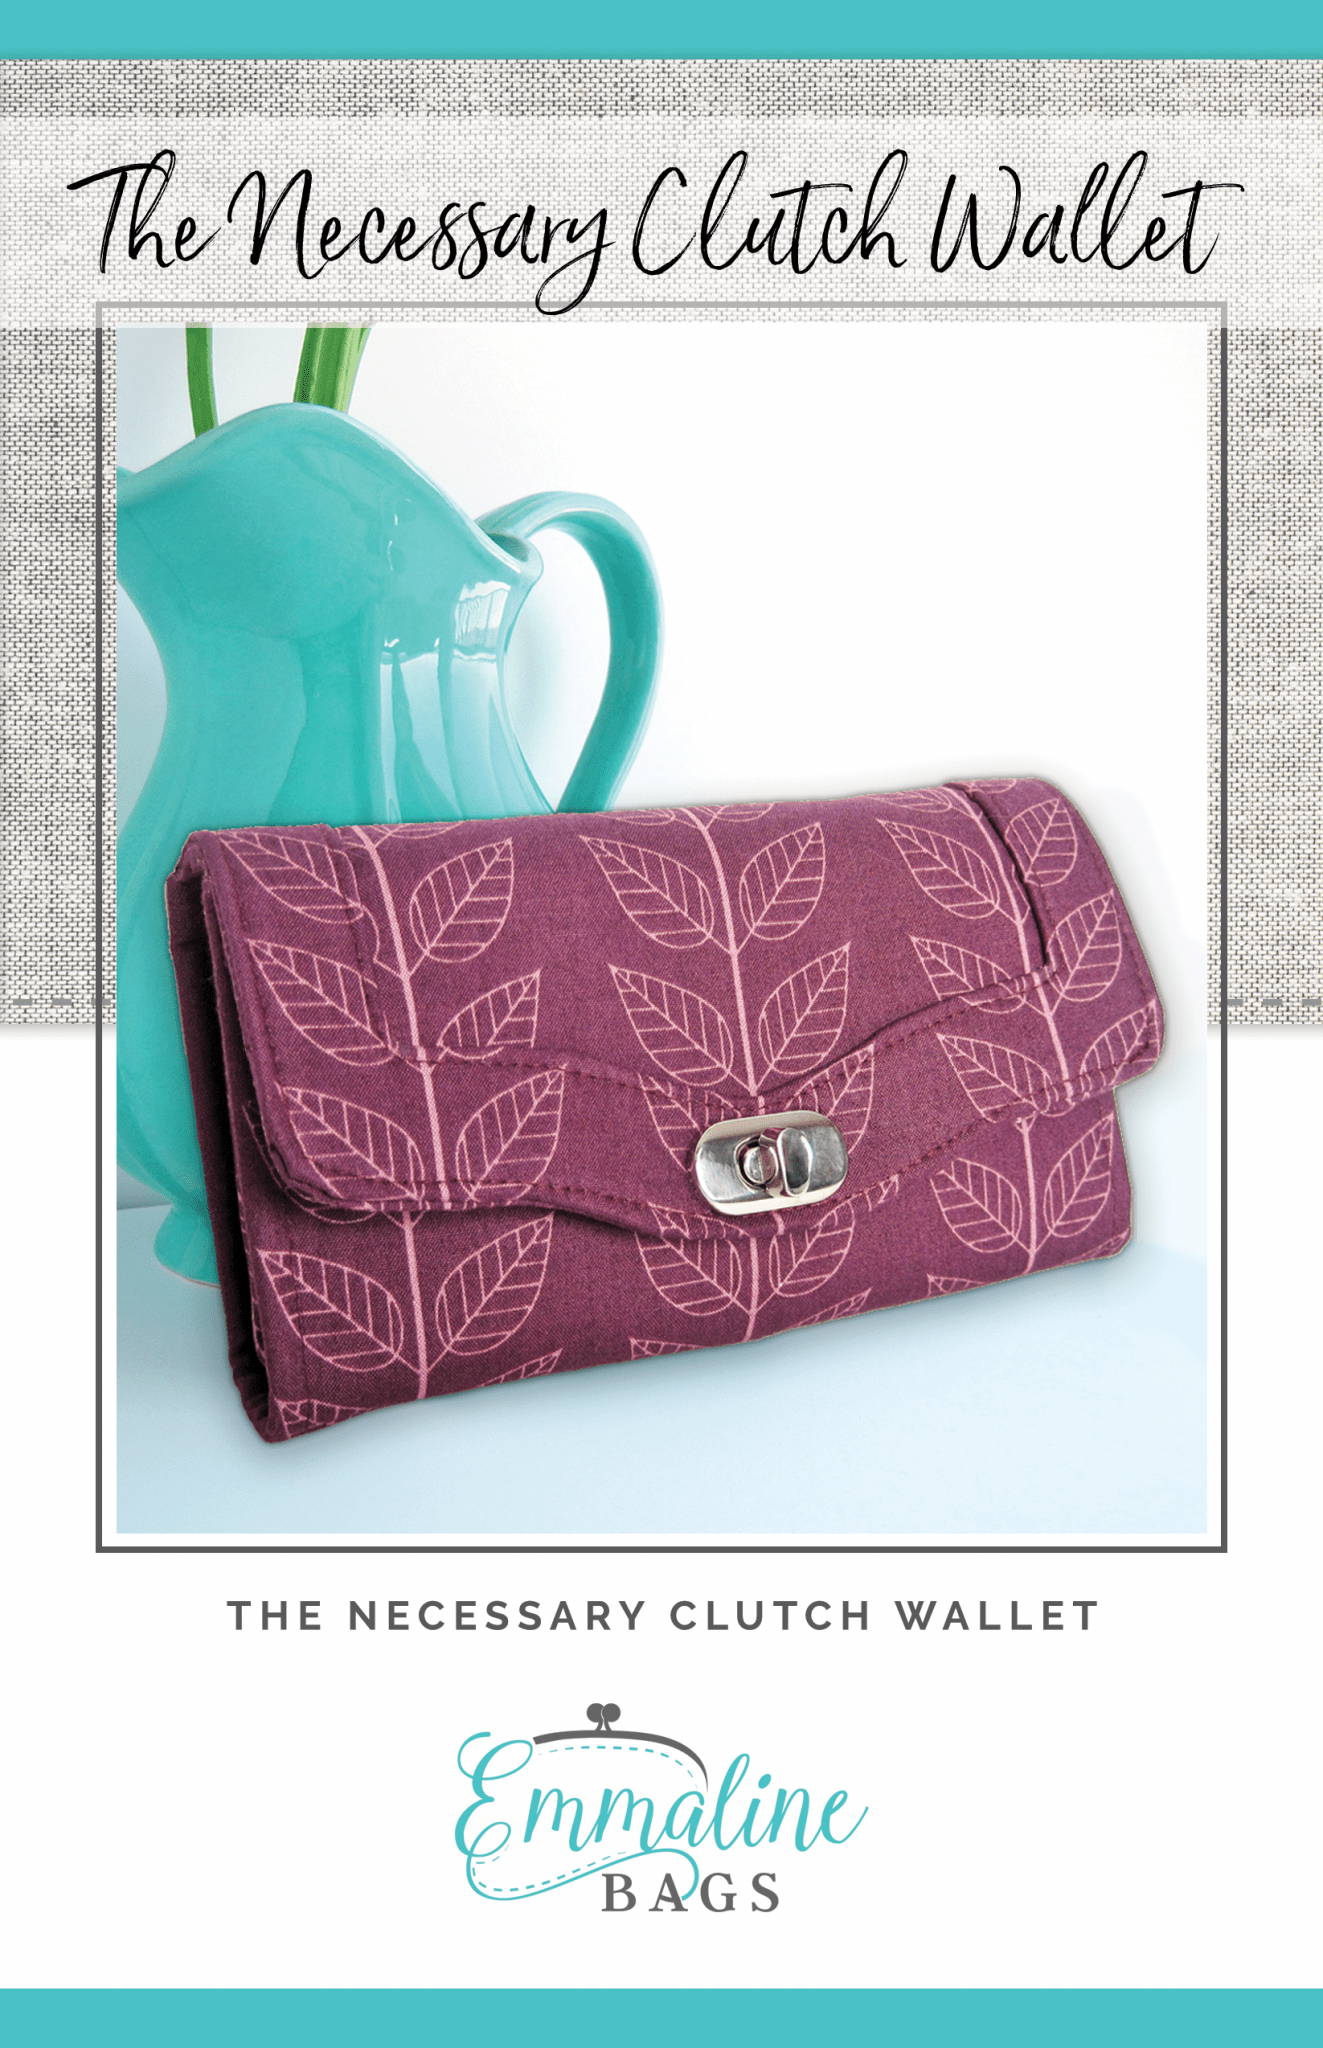 PDF - The Necessary Clutch Wallet